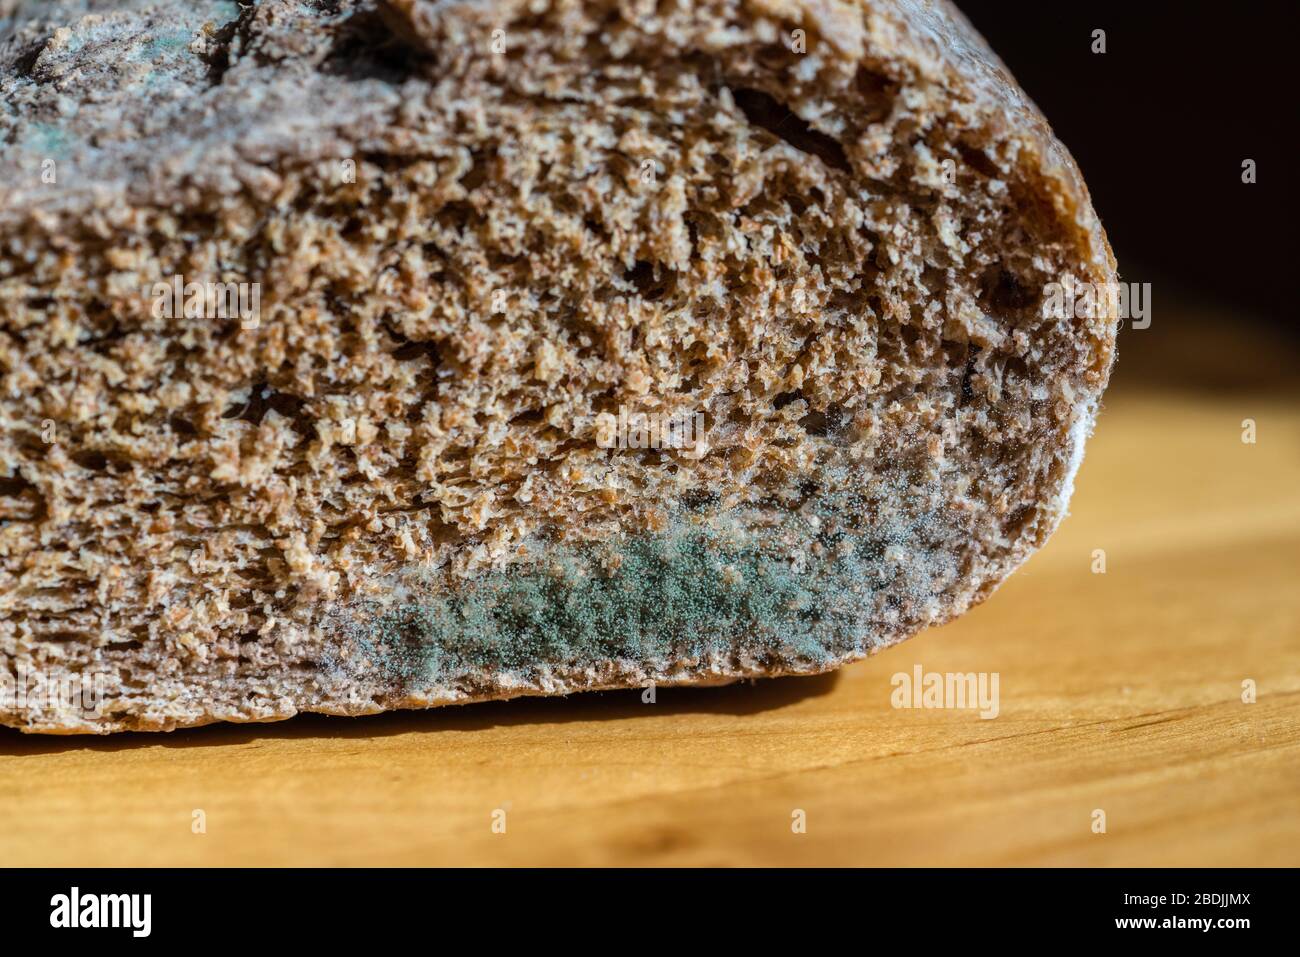 Penicillium sp. mould on bread - mouldy loaf of bread Stock Photo